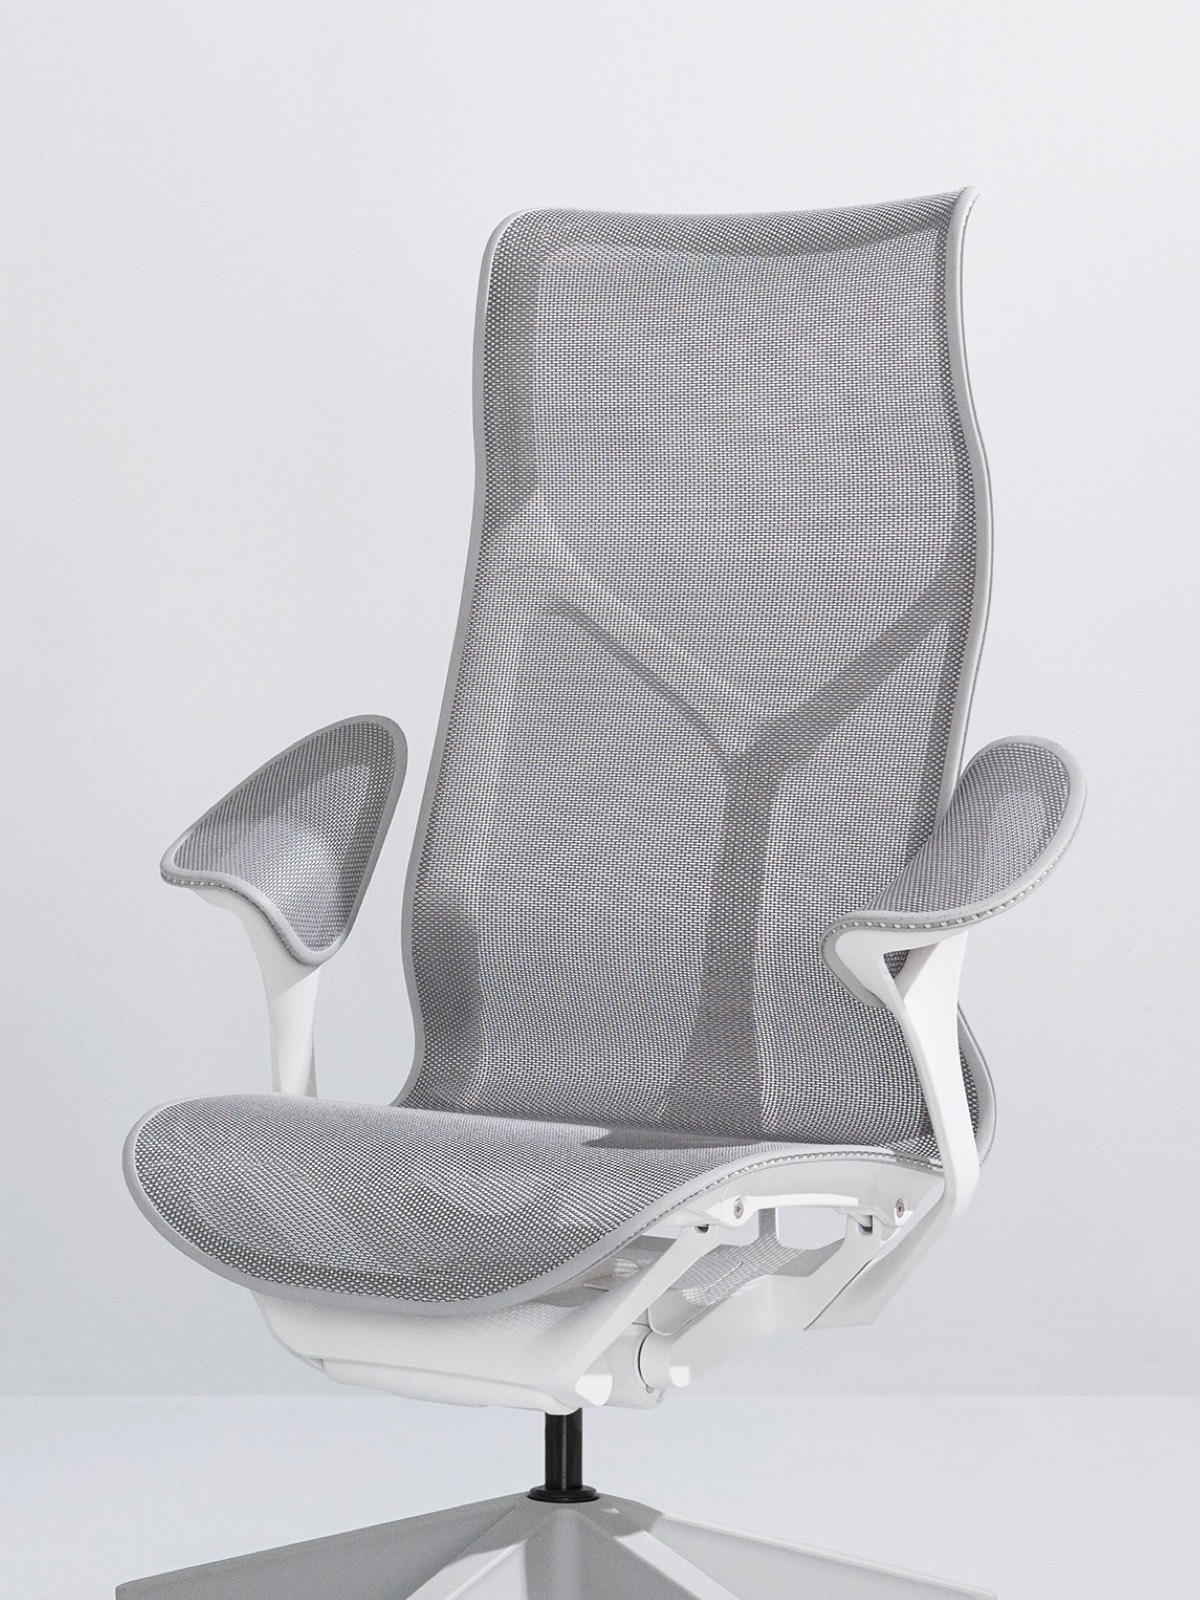 A Mineral gray high-back Cosm Chair with a white frame and leaf arms on a light gray background.